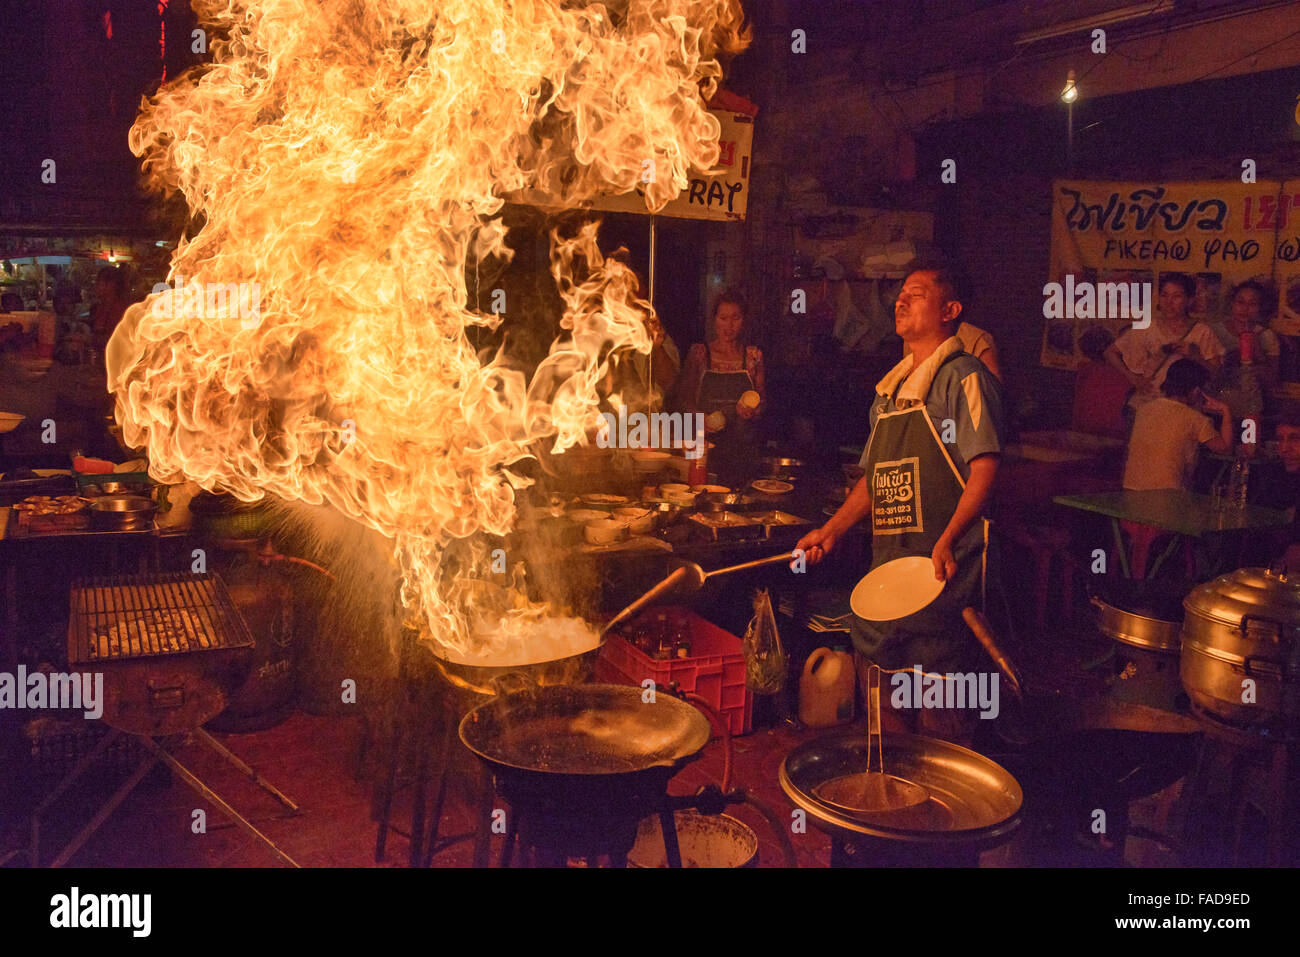 Crazy chef cooking morning glory with massive flames in Chinatown in Bangkok, Thailand Stock Photo